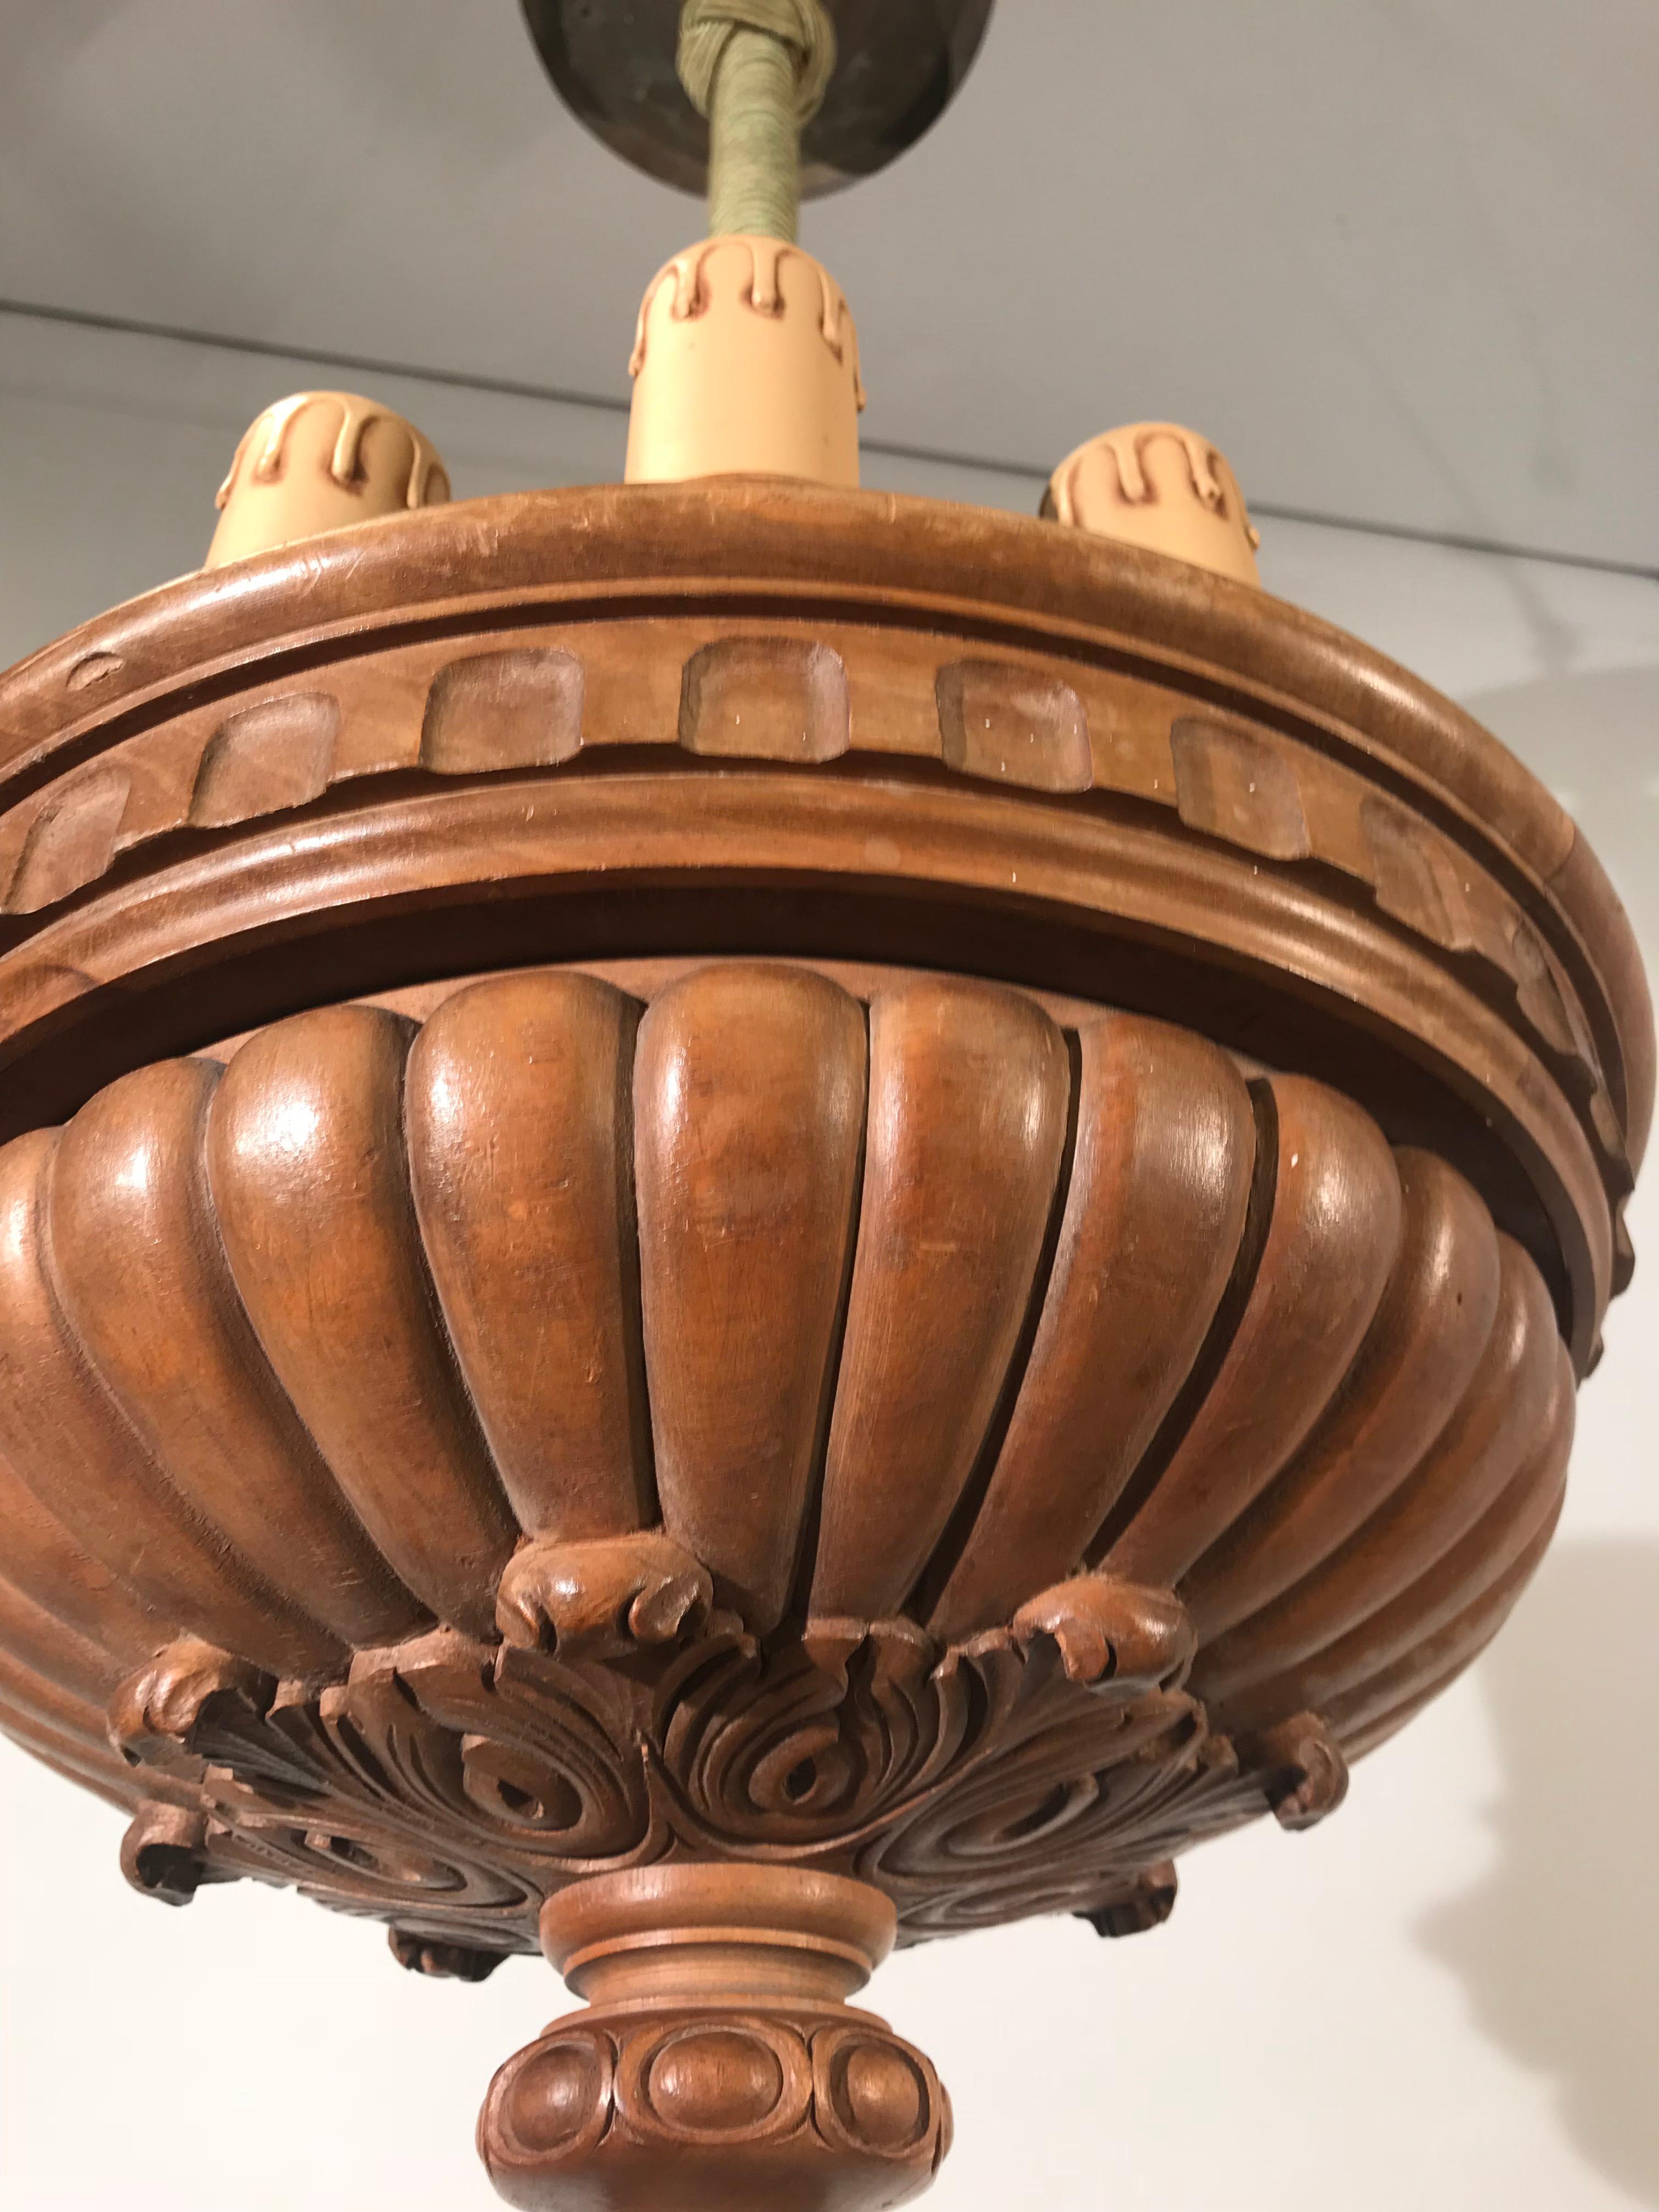 Rare and Decorative Early 1900s Eight-Light Quality Carved Nutwood Pendant Light For Sale 6